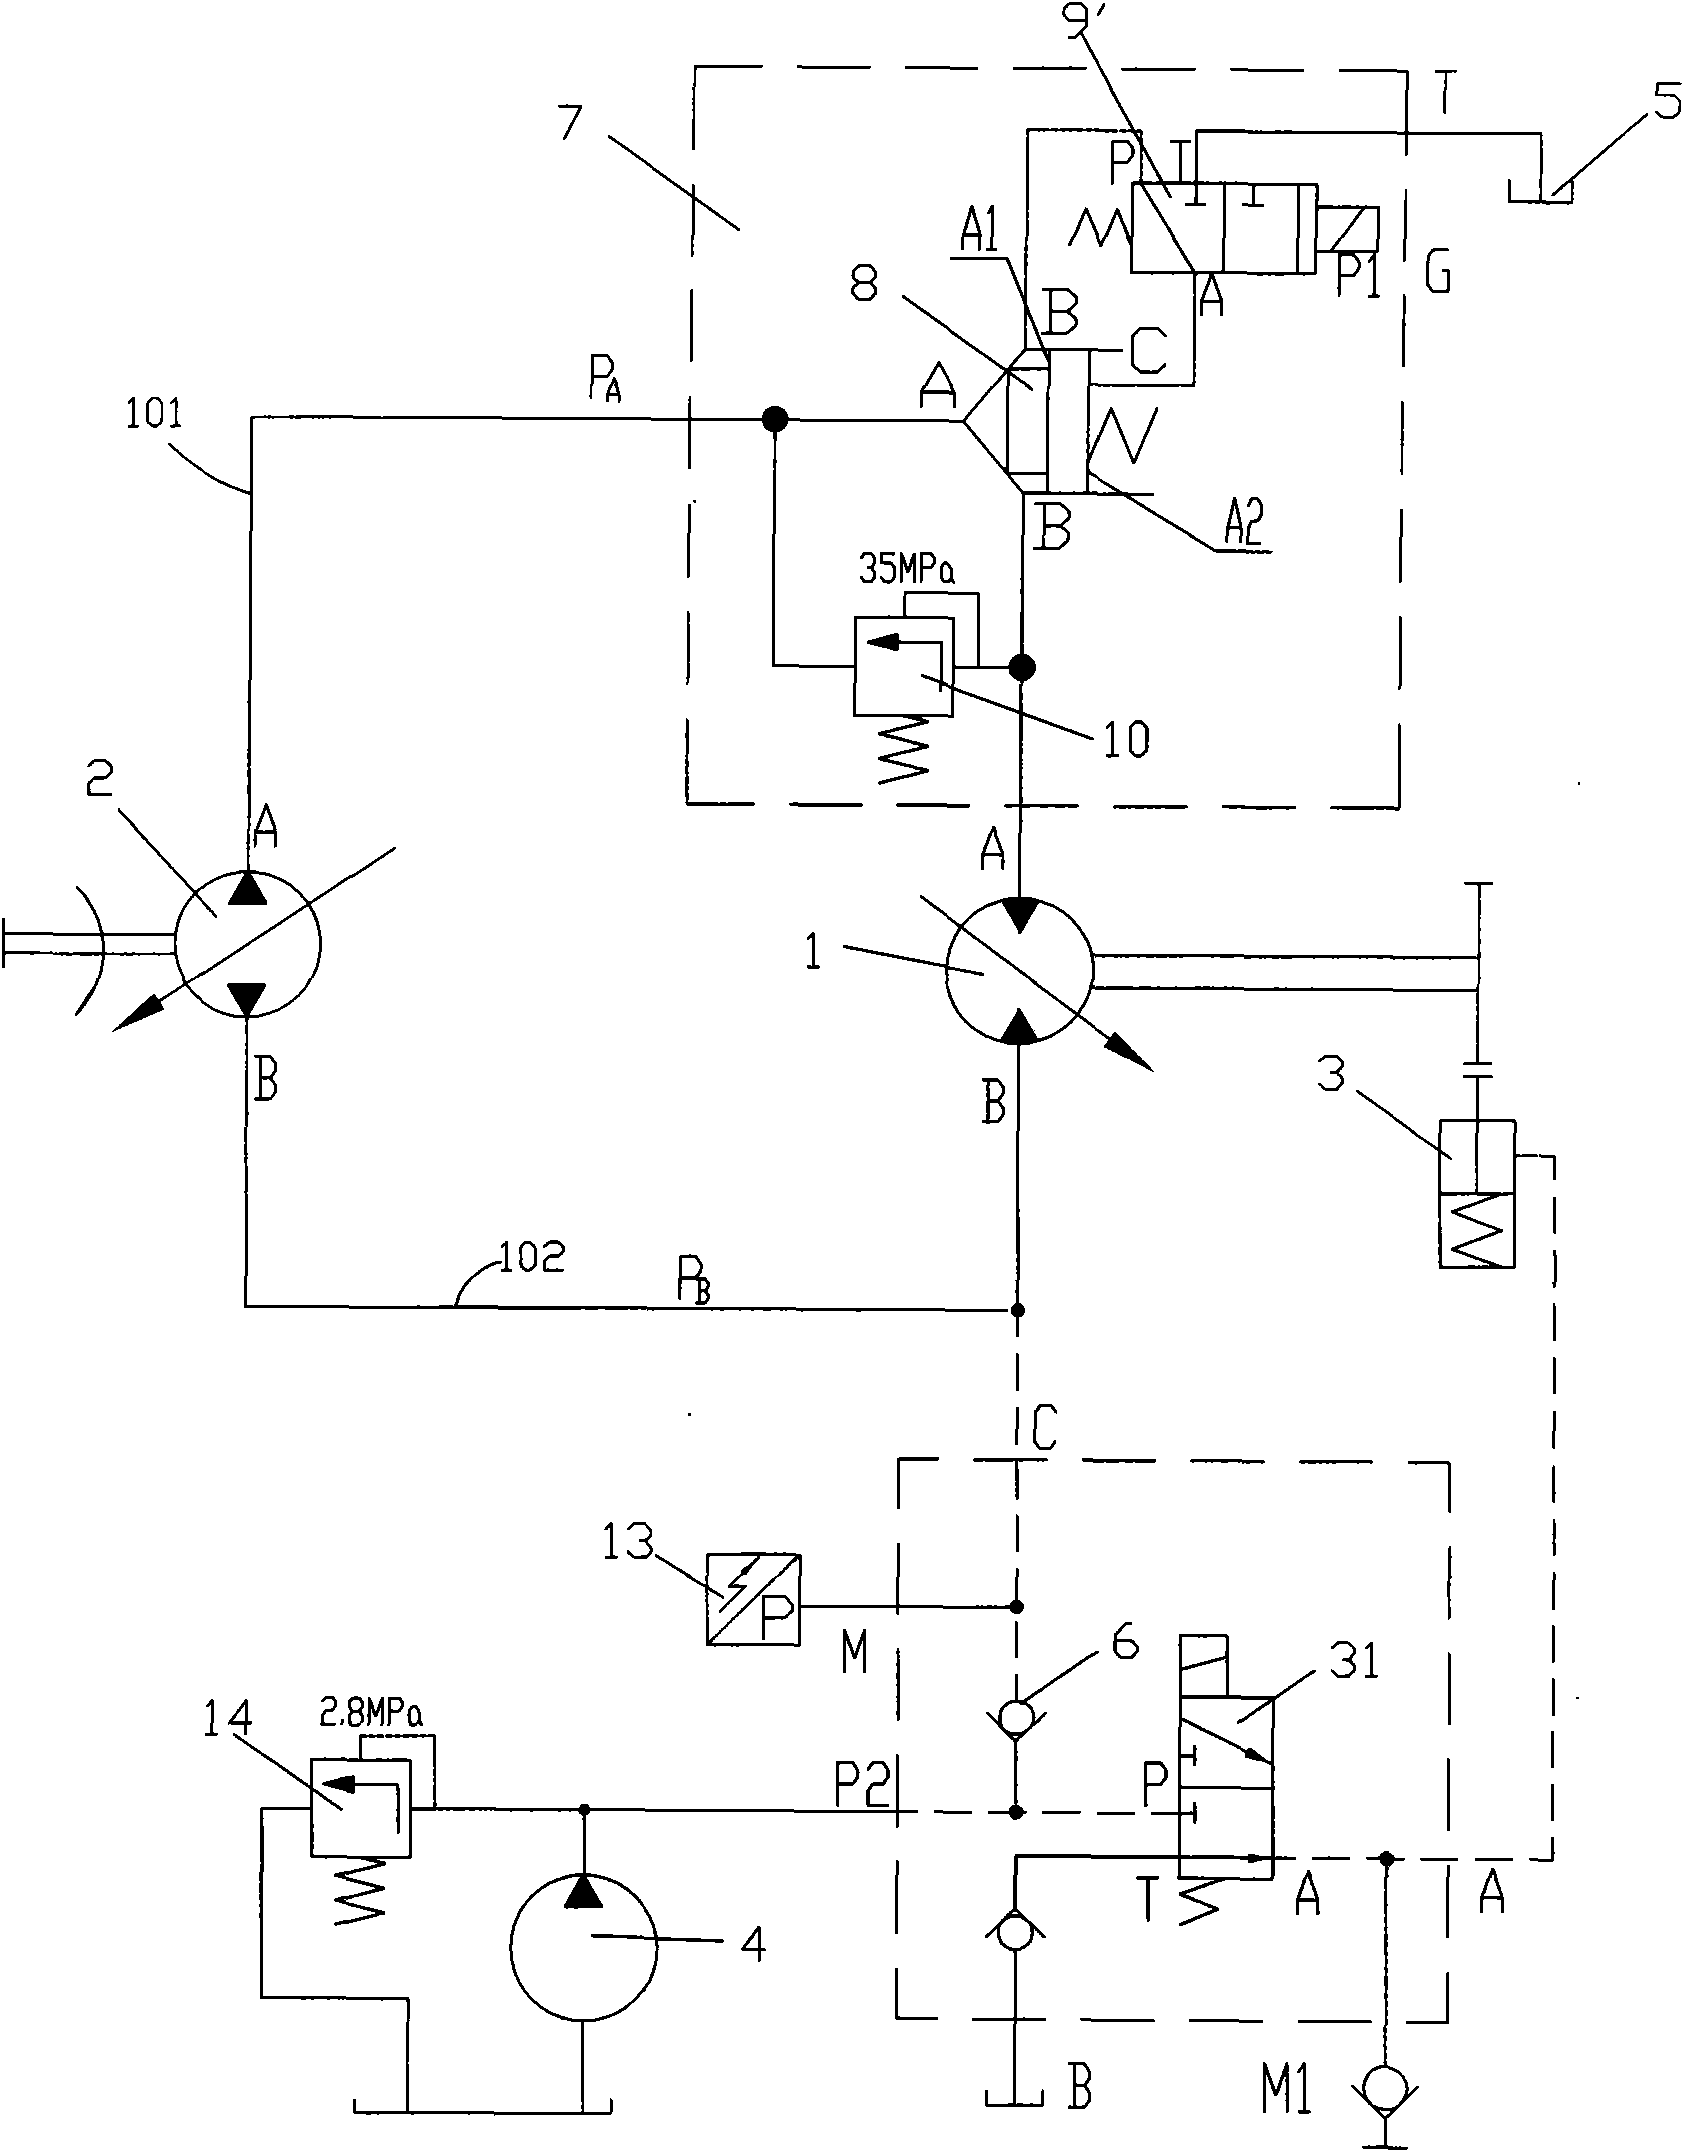 Hoist motor closed type hydraulic system for preventing pipelines from bursting and control method thereof